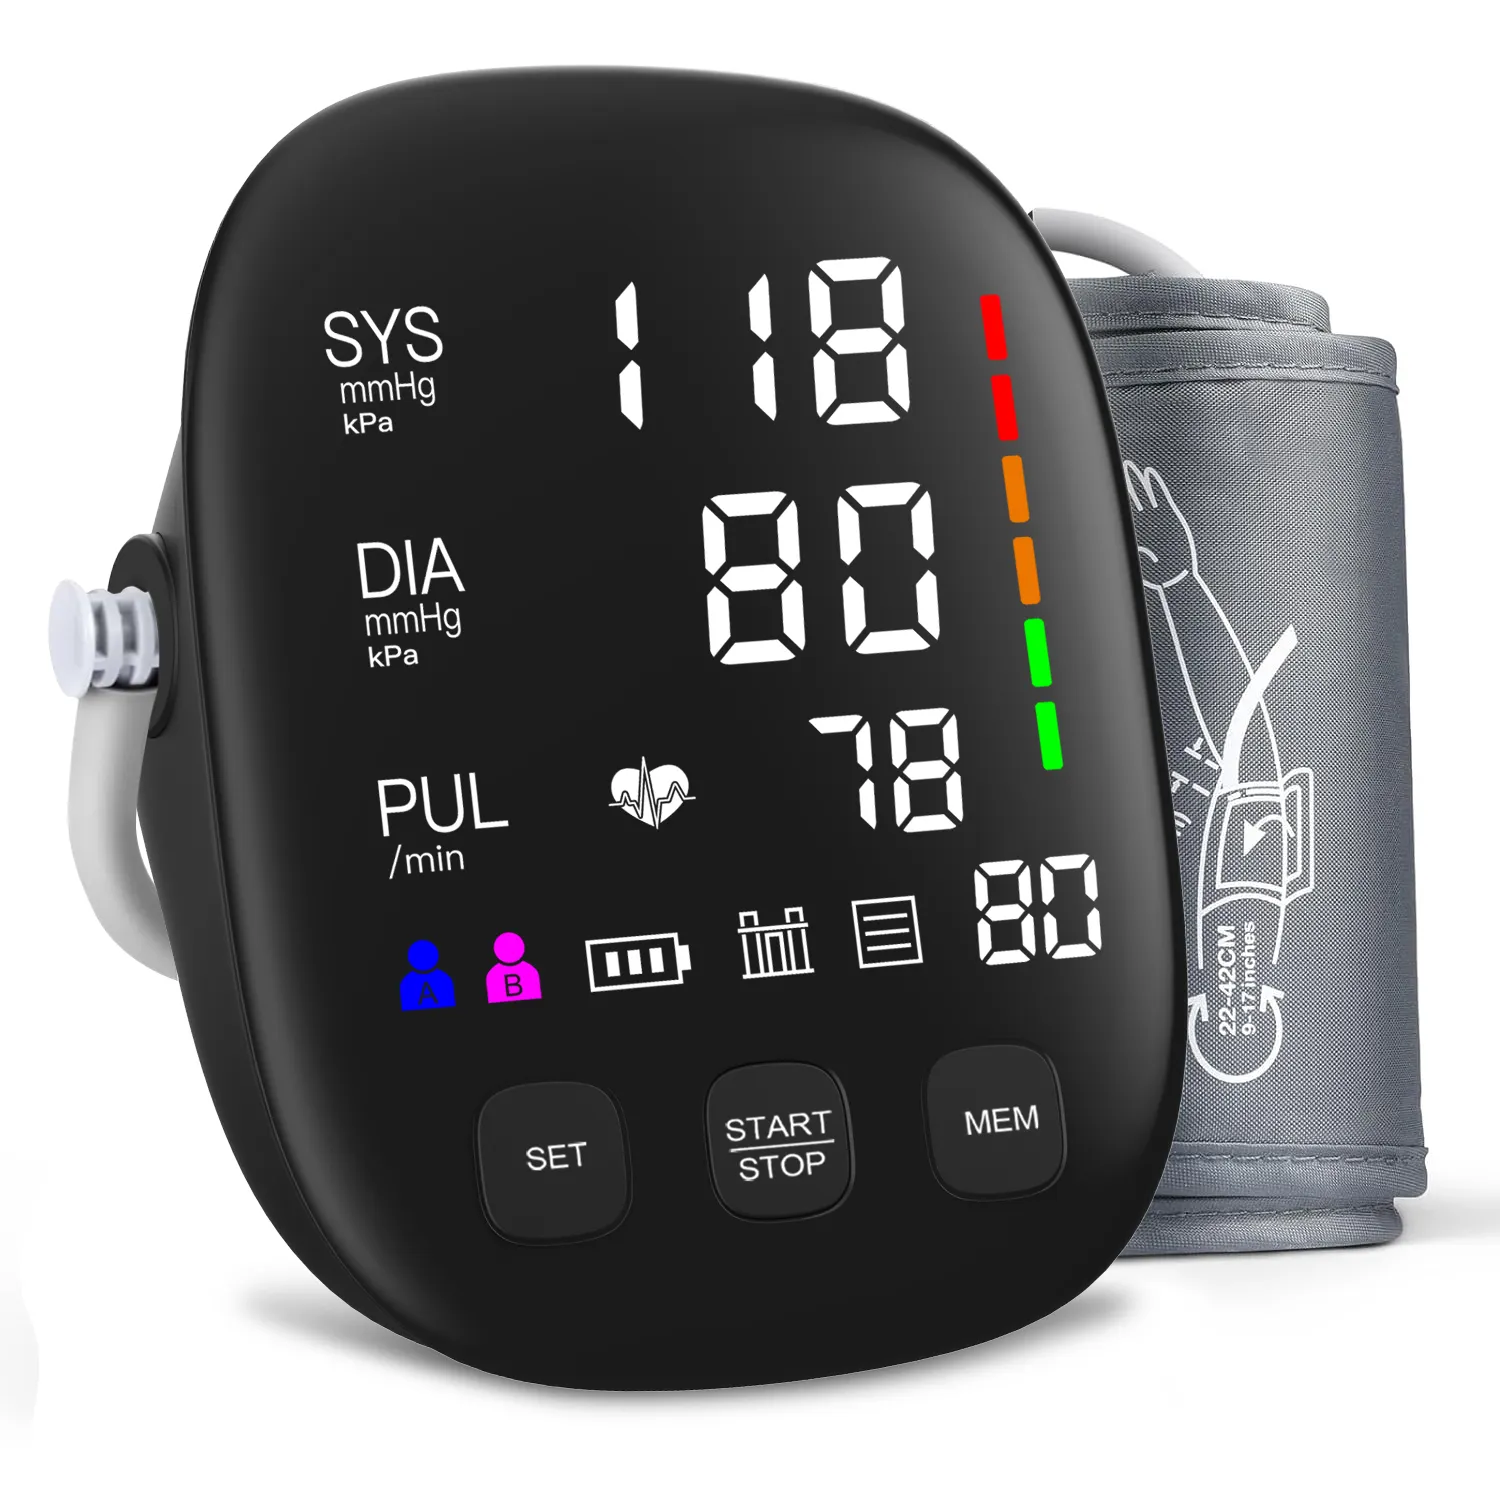 Automatic Upper Arm Blood Pressure Monitors for Home Use with Digital LED Display Sphygmomanometer Arm Blood Pressure Monitor